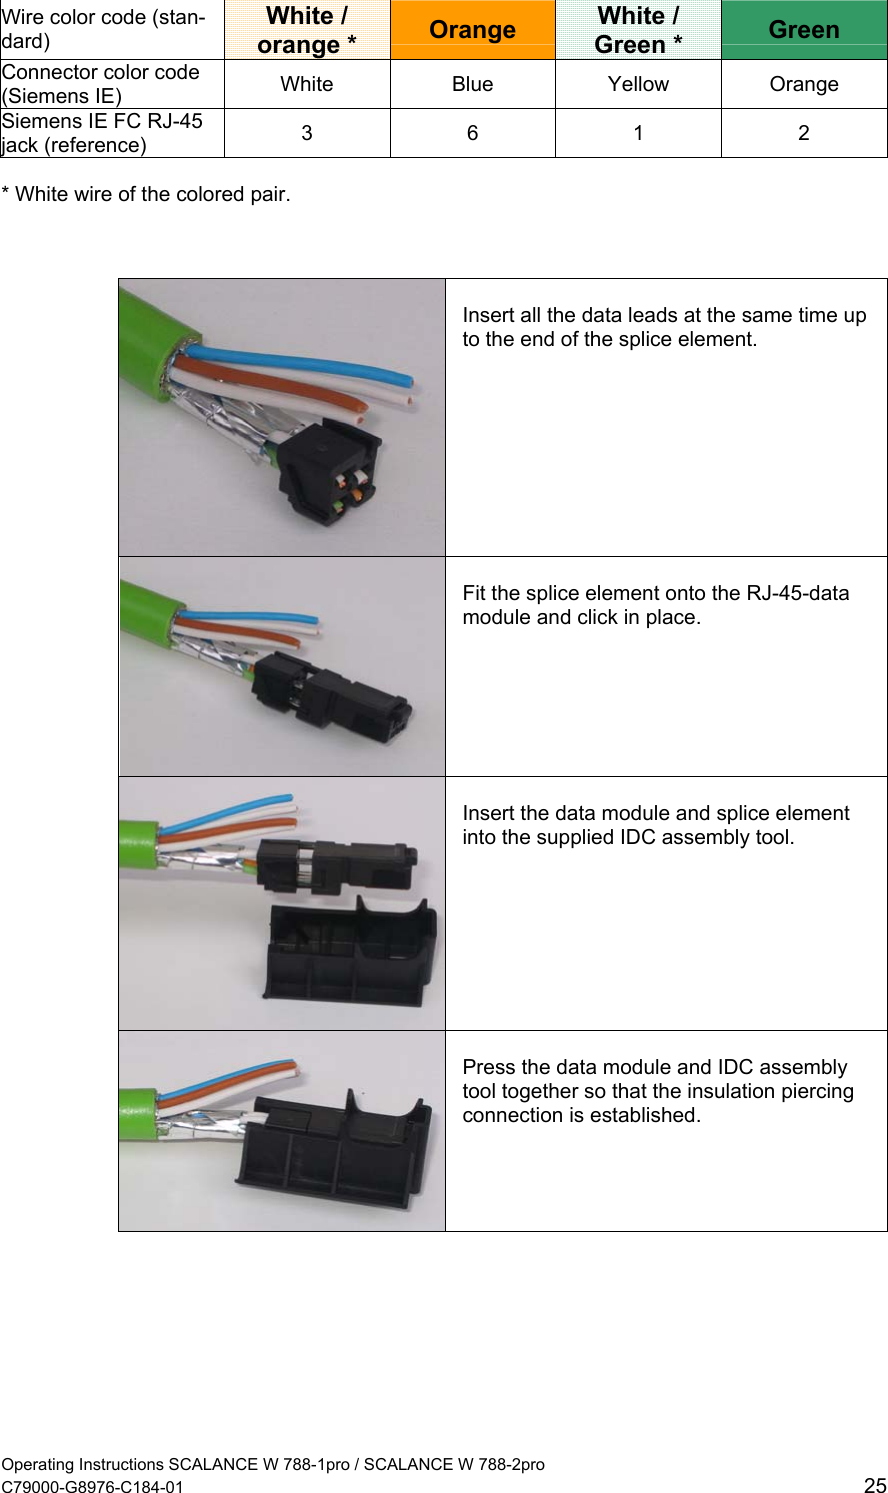  Wire color code (stan-dard) White /  orange *  Orange  White /  Green *  Green Connector color code (Siemens IE)  White Blue Yellow Orange Siemens IE FC RJ-45  jack (reference)  3 6 1 2  * White wire of the colored pair.     Insert all the data leads at the same time up to the end of the splice element.  Fit the splice element onto the RJ-45-data module and click in place.  Insert the data module and splice element into the supplied IDC assembly tool.  Press the data module and IDC assembly tool together so that the insulation piercing connection is established. Operating Instructions SCALANCE W 788-1pro / SCALANCE W 788-2pro C79000-G8976-C184-01  25 